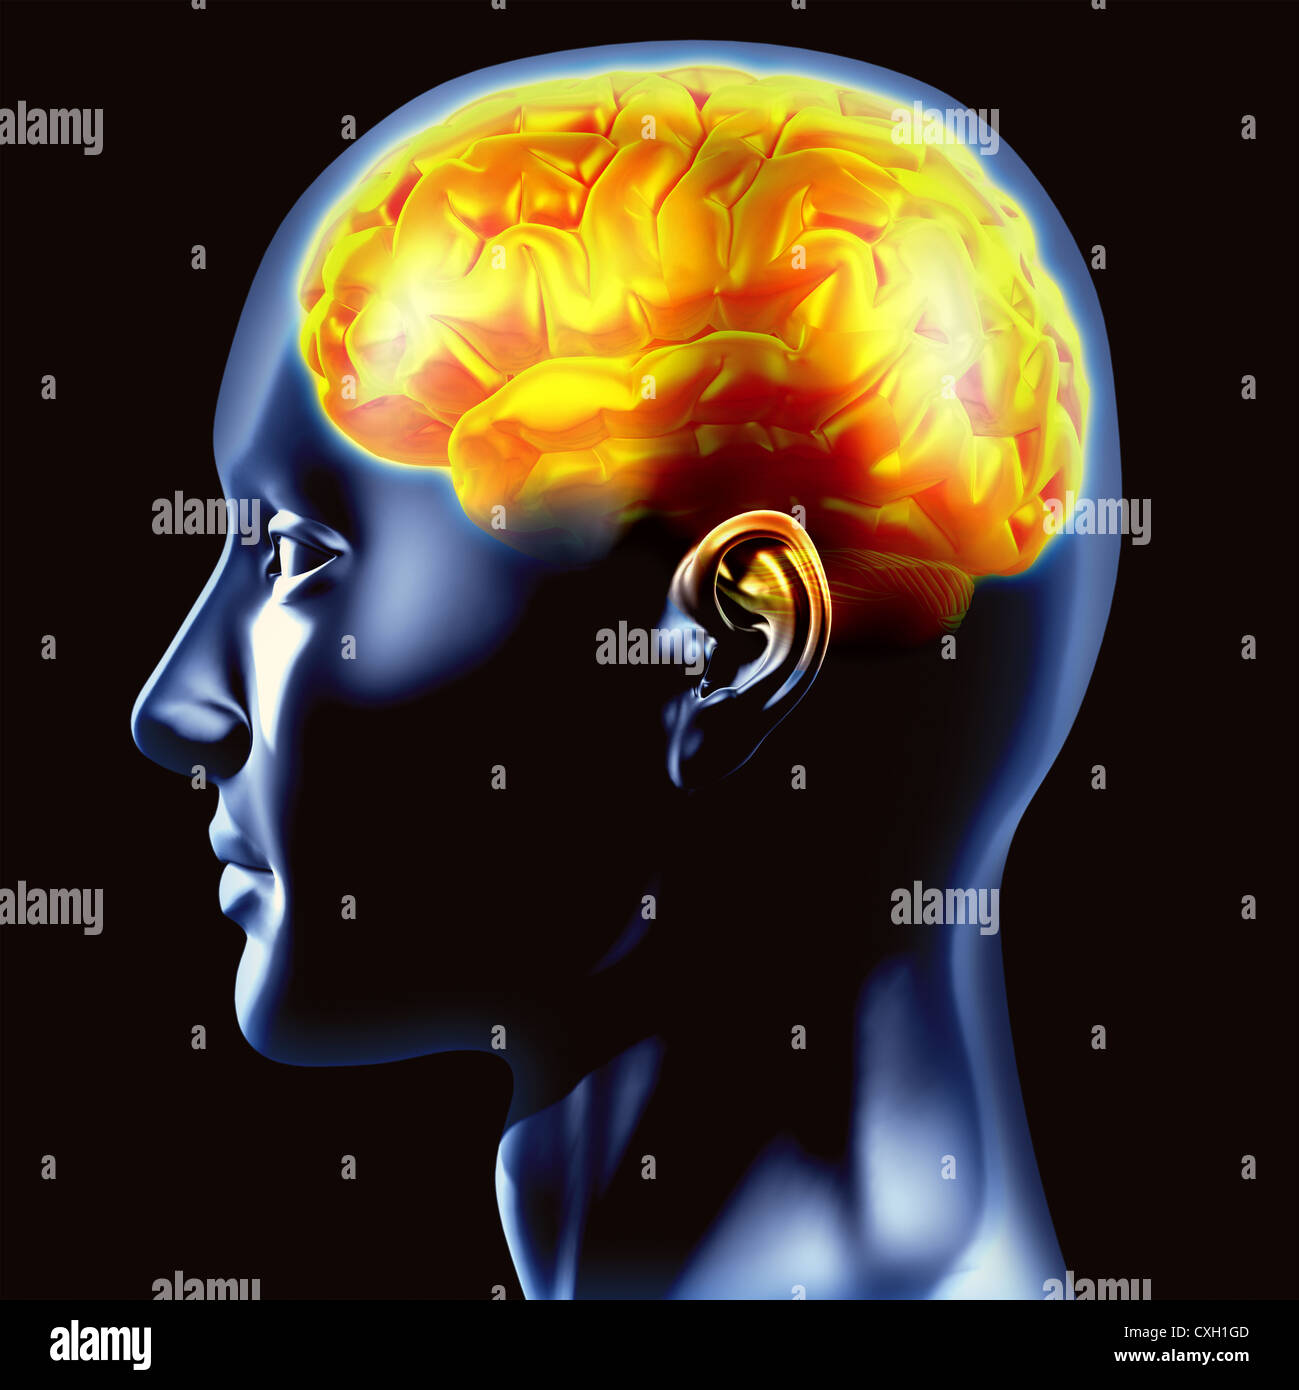 Human head from side, showing the brain in activity. Stock Photo